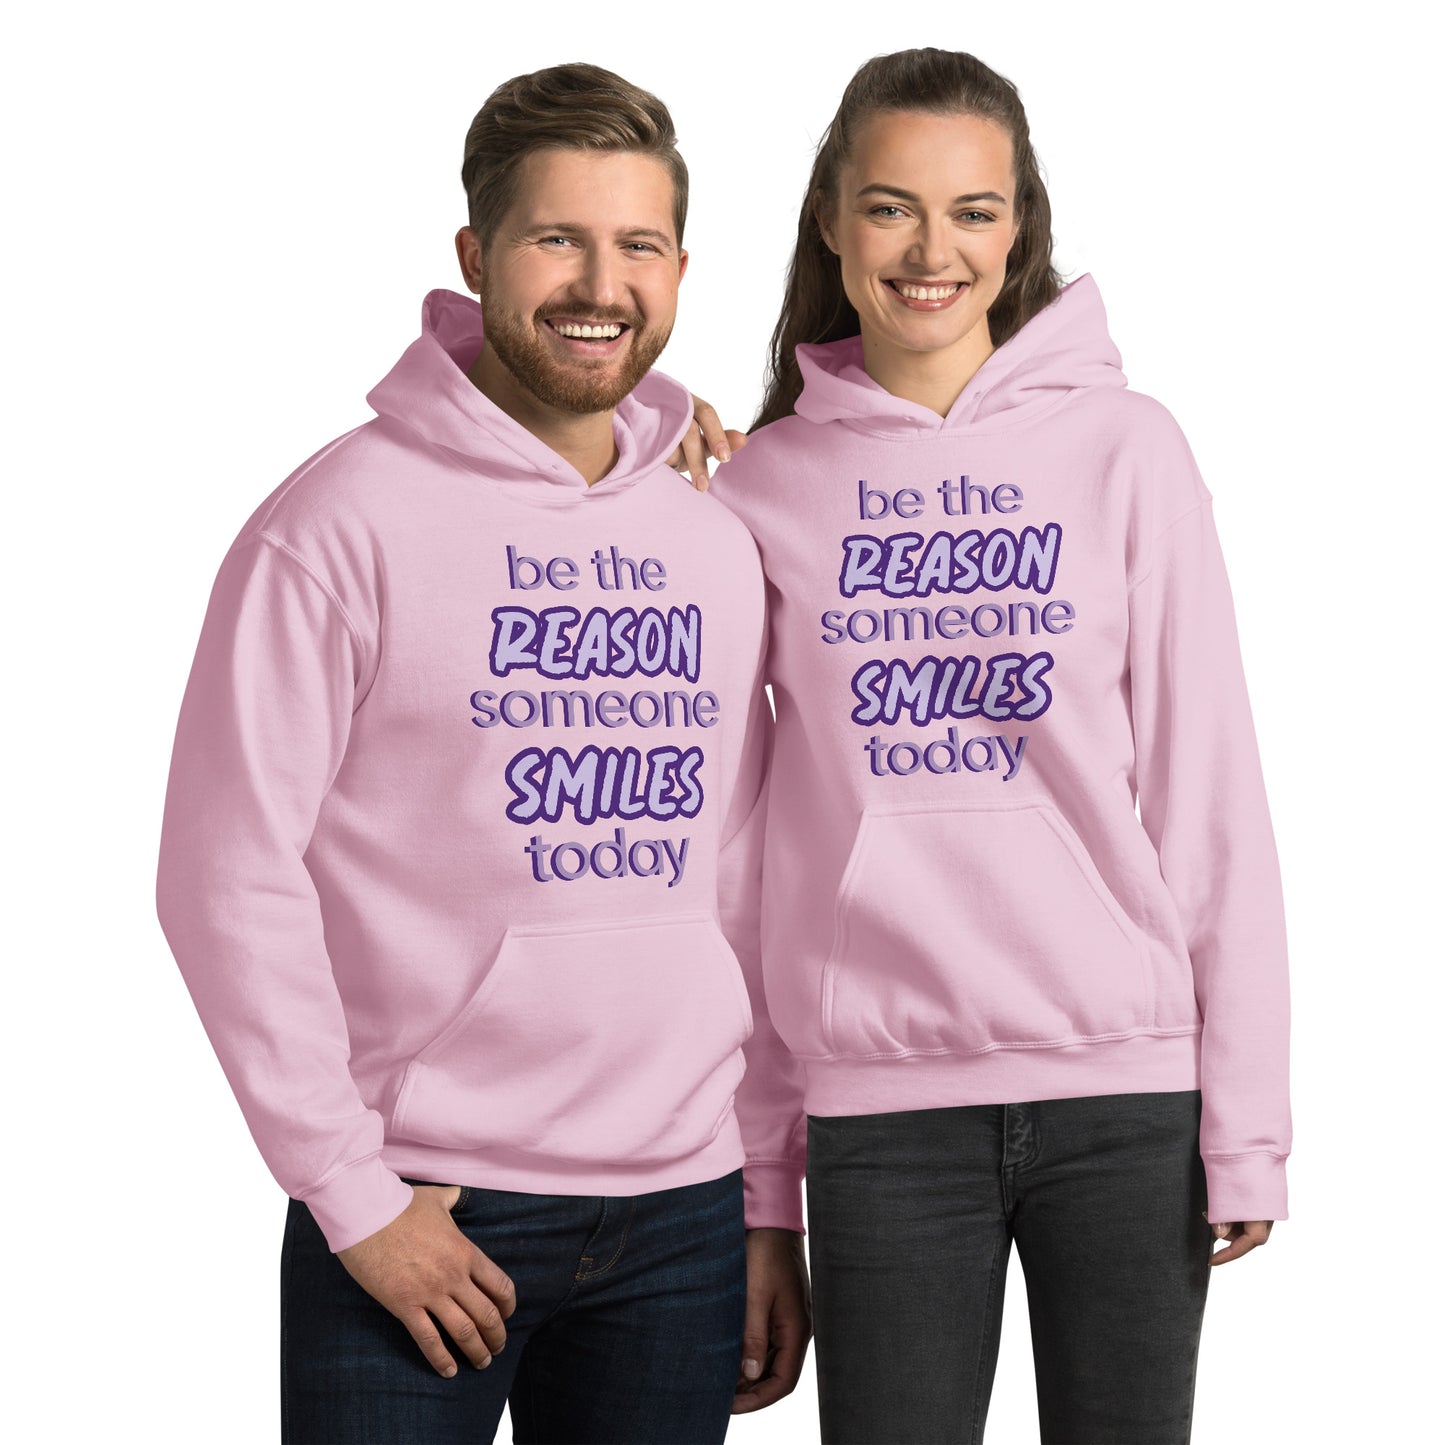 Men and women with light pink hoodie and the quote "be the reason someone smiles today" in purple on it. 